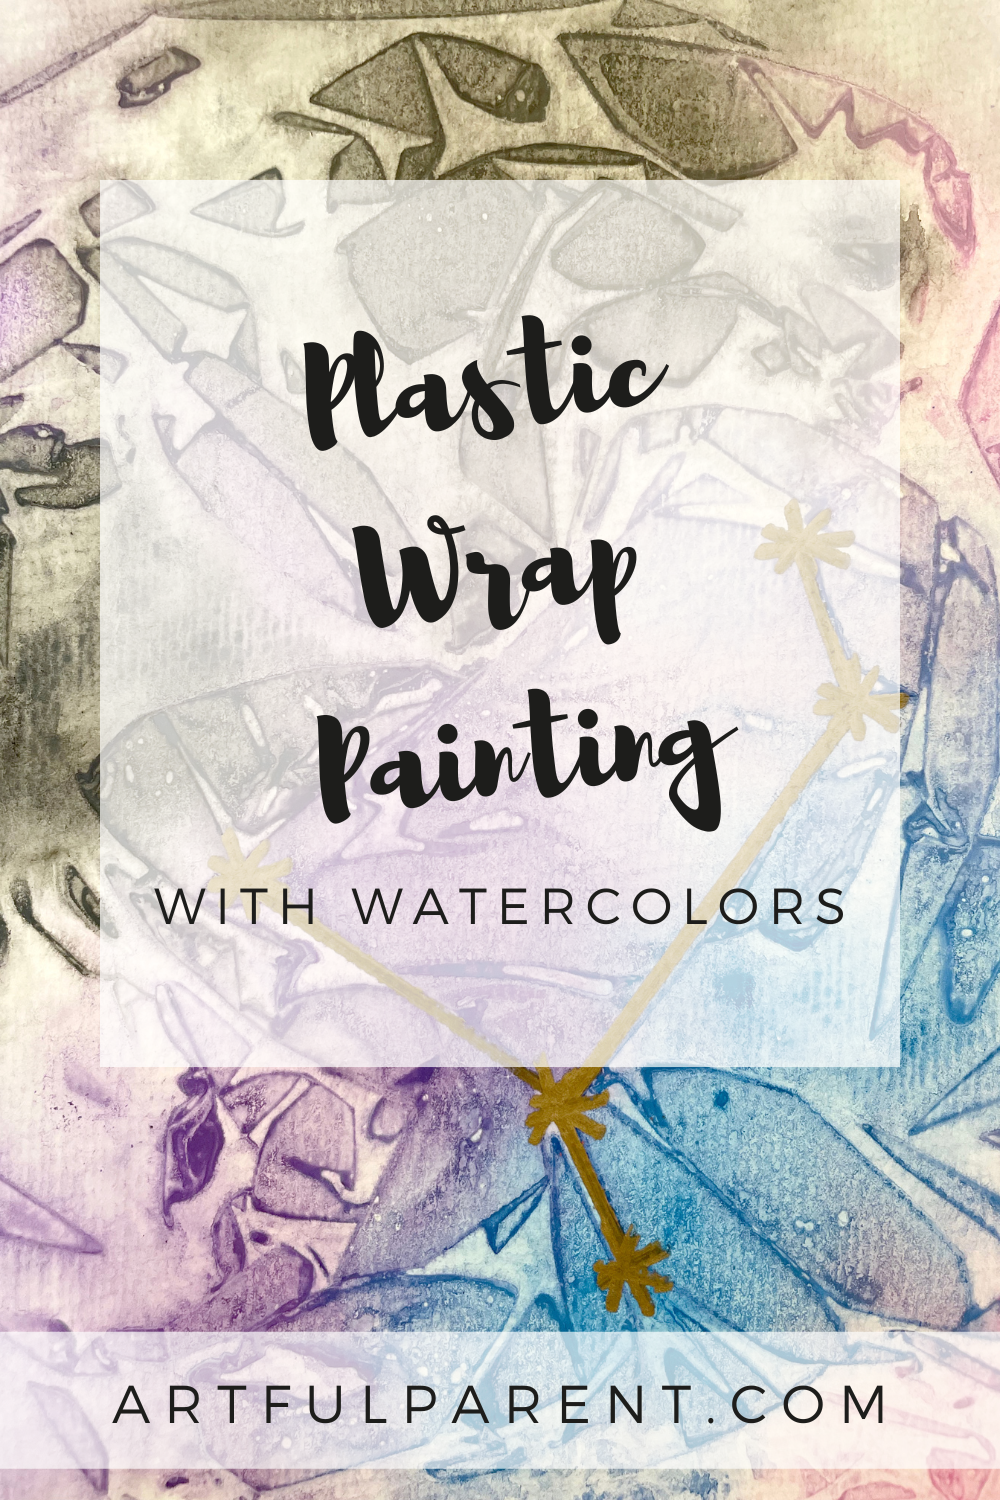 How to Do Plastic Wrap Painting with Watercolors